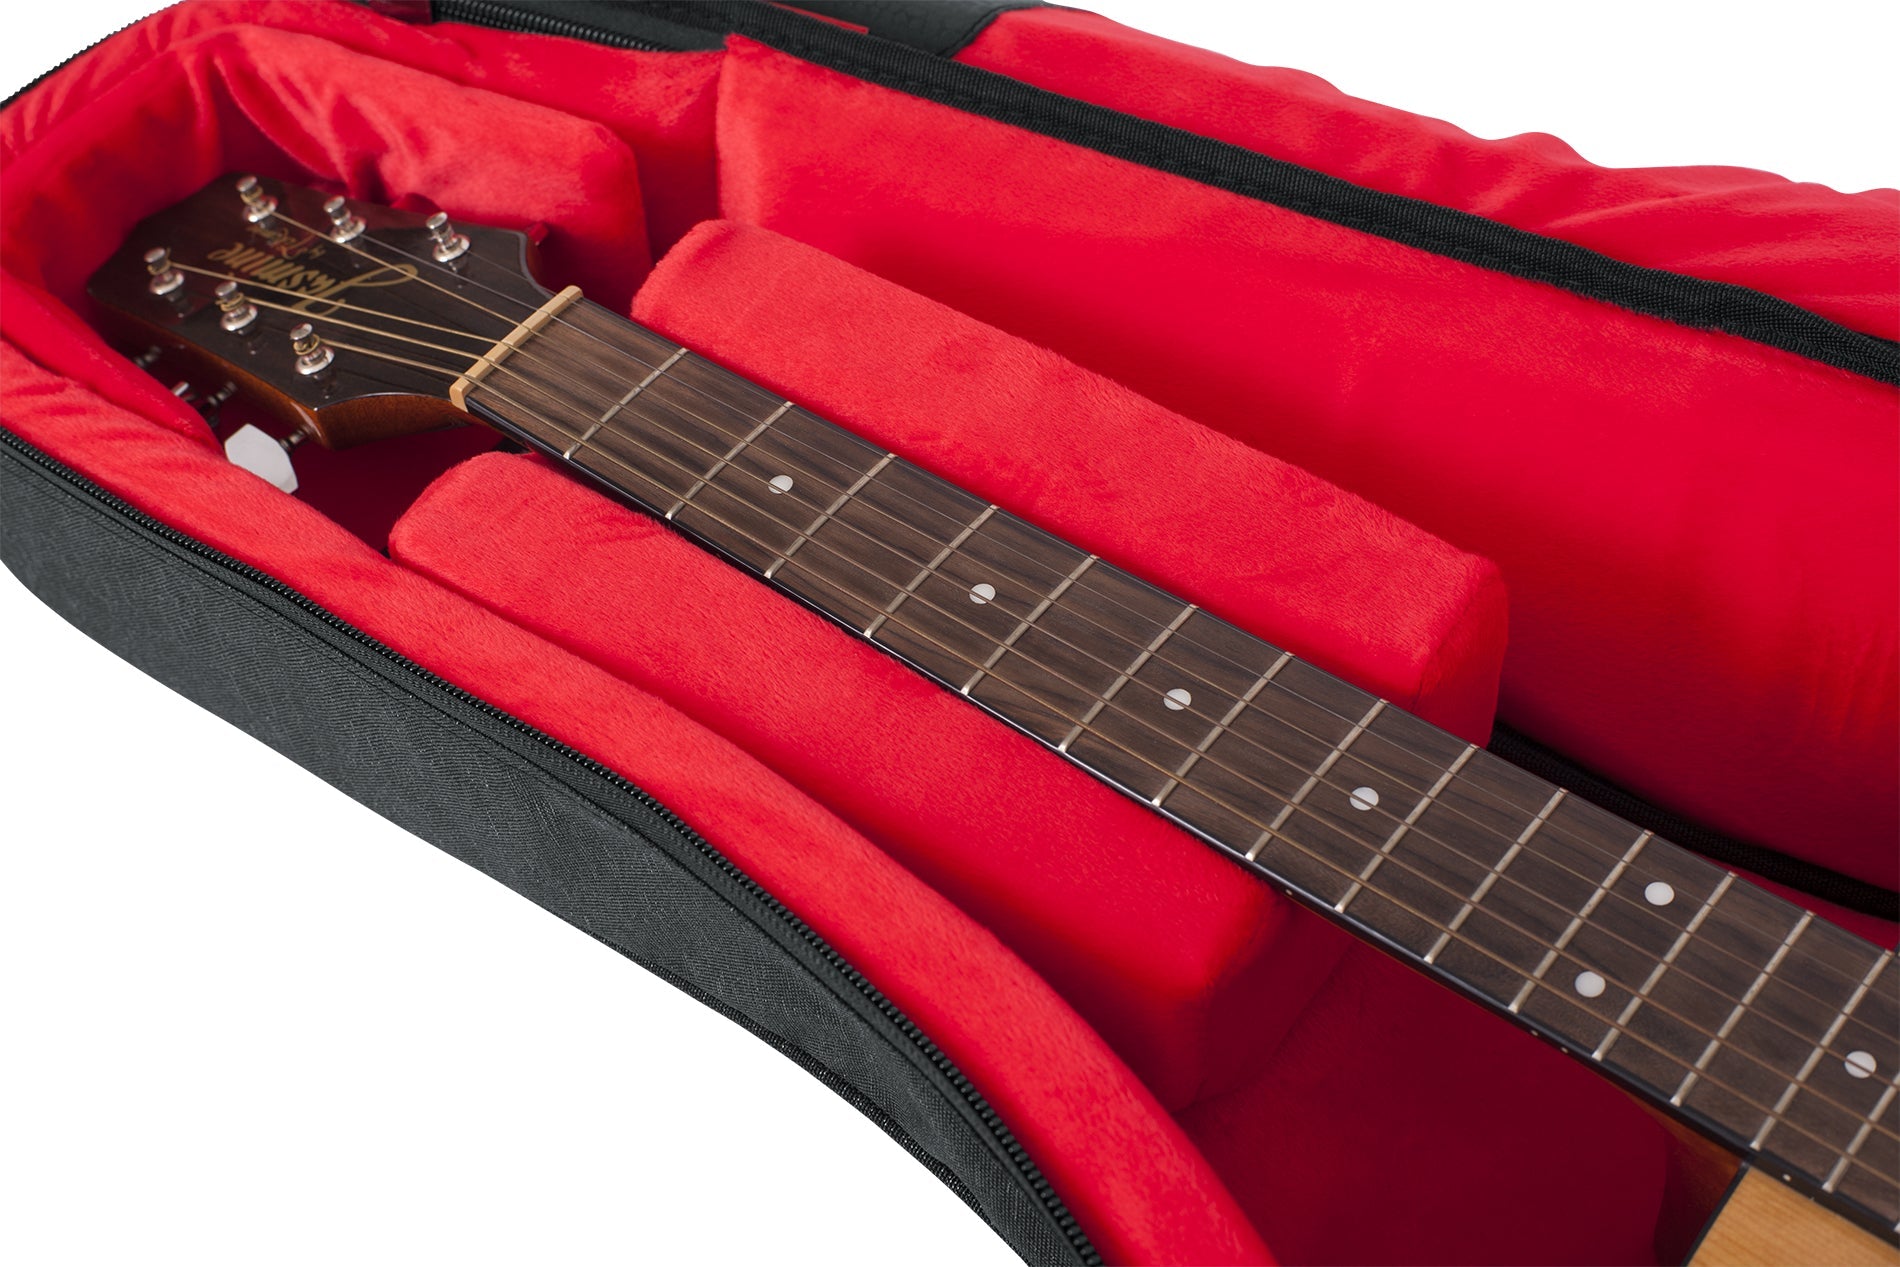 Gator Transit Series Acoustic Guitar Gig Bag with Charcoal Exterior - GT-ACOUSTIC-BLK - Premium Guitar Gig Bag from Gator - Just $129.99! Shop now at Poppa's Music